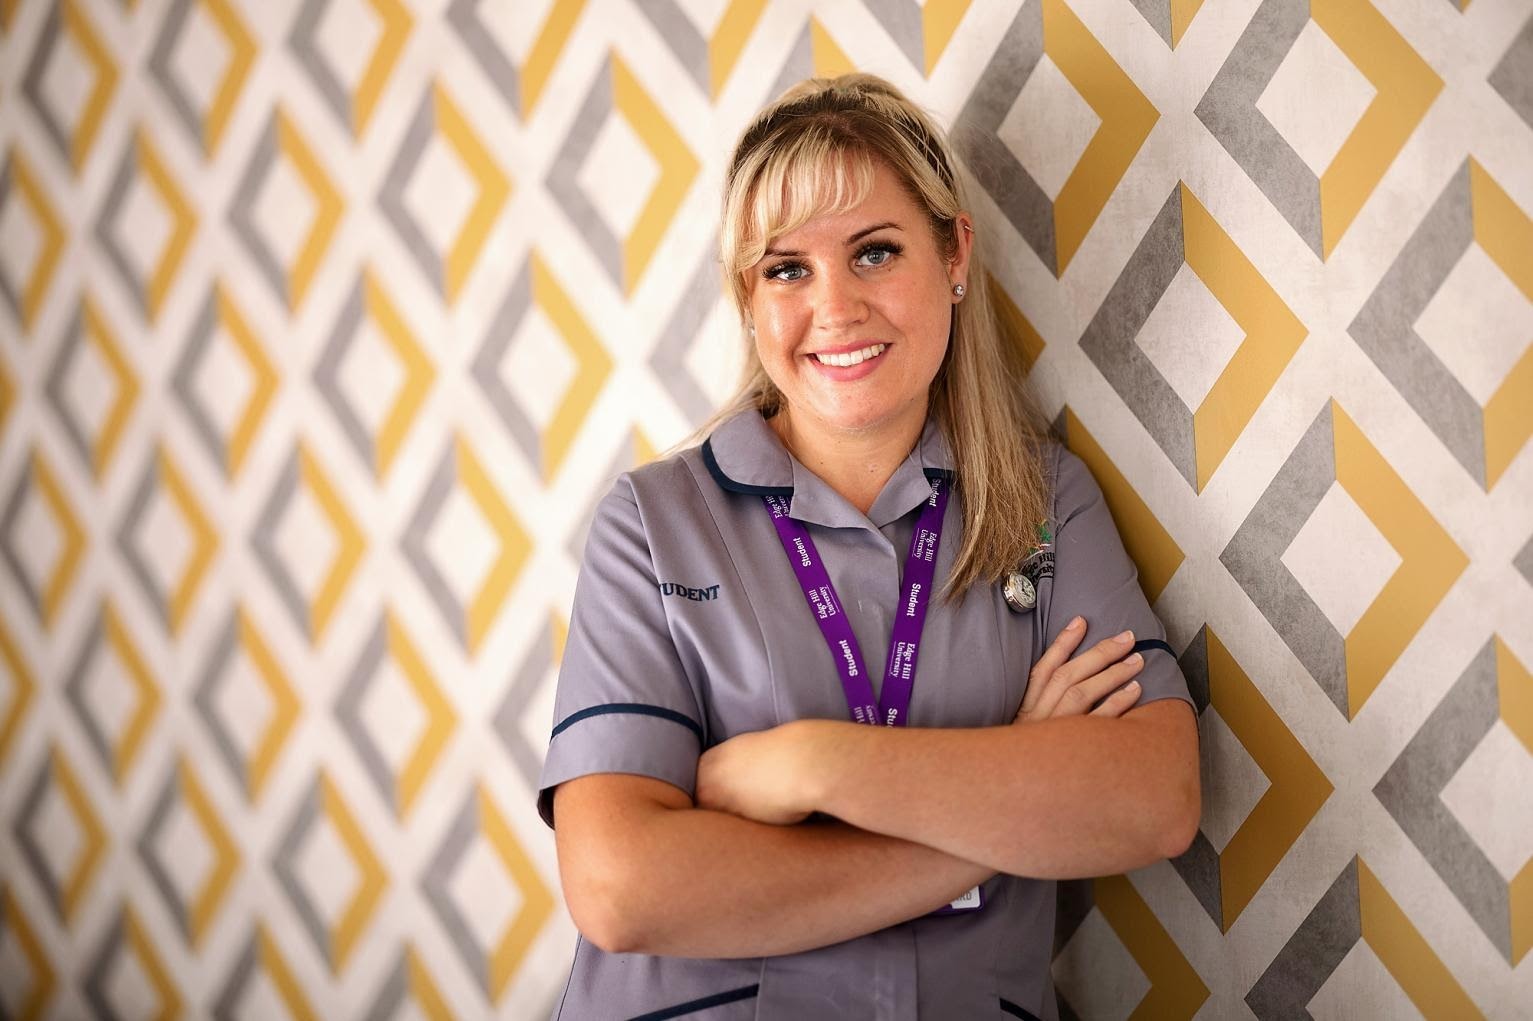 Cristina Campbell says that an apprenticeship is the perfect path for her to become a nurse